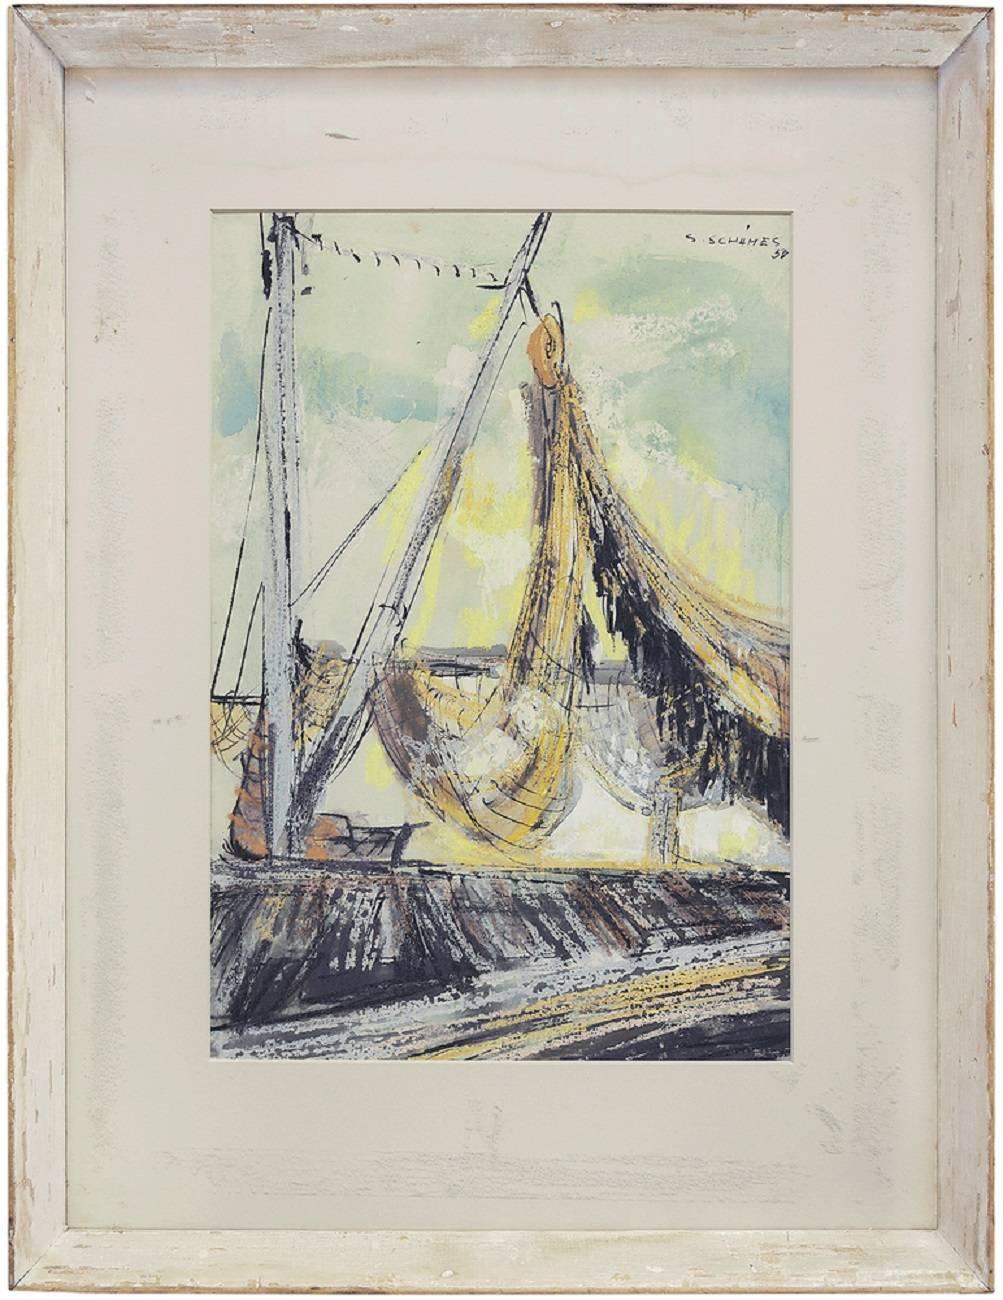 German American Expressionist Abstract Sailboat - Art by Samson Schames